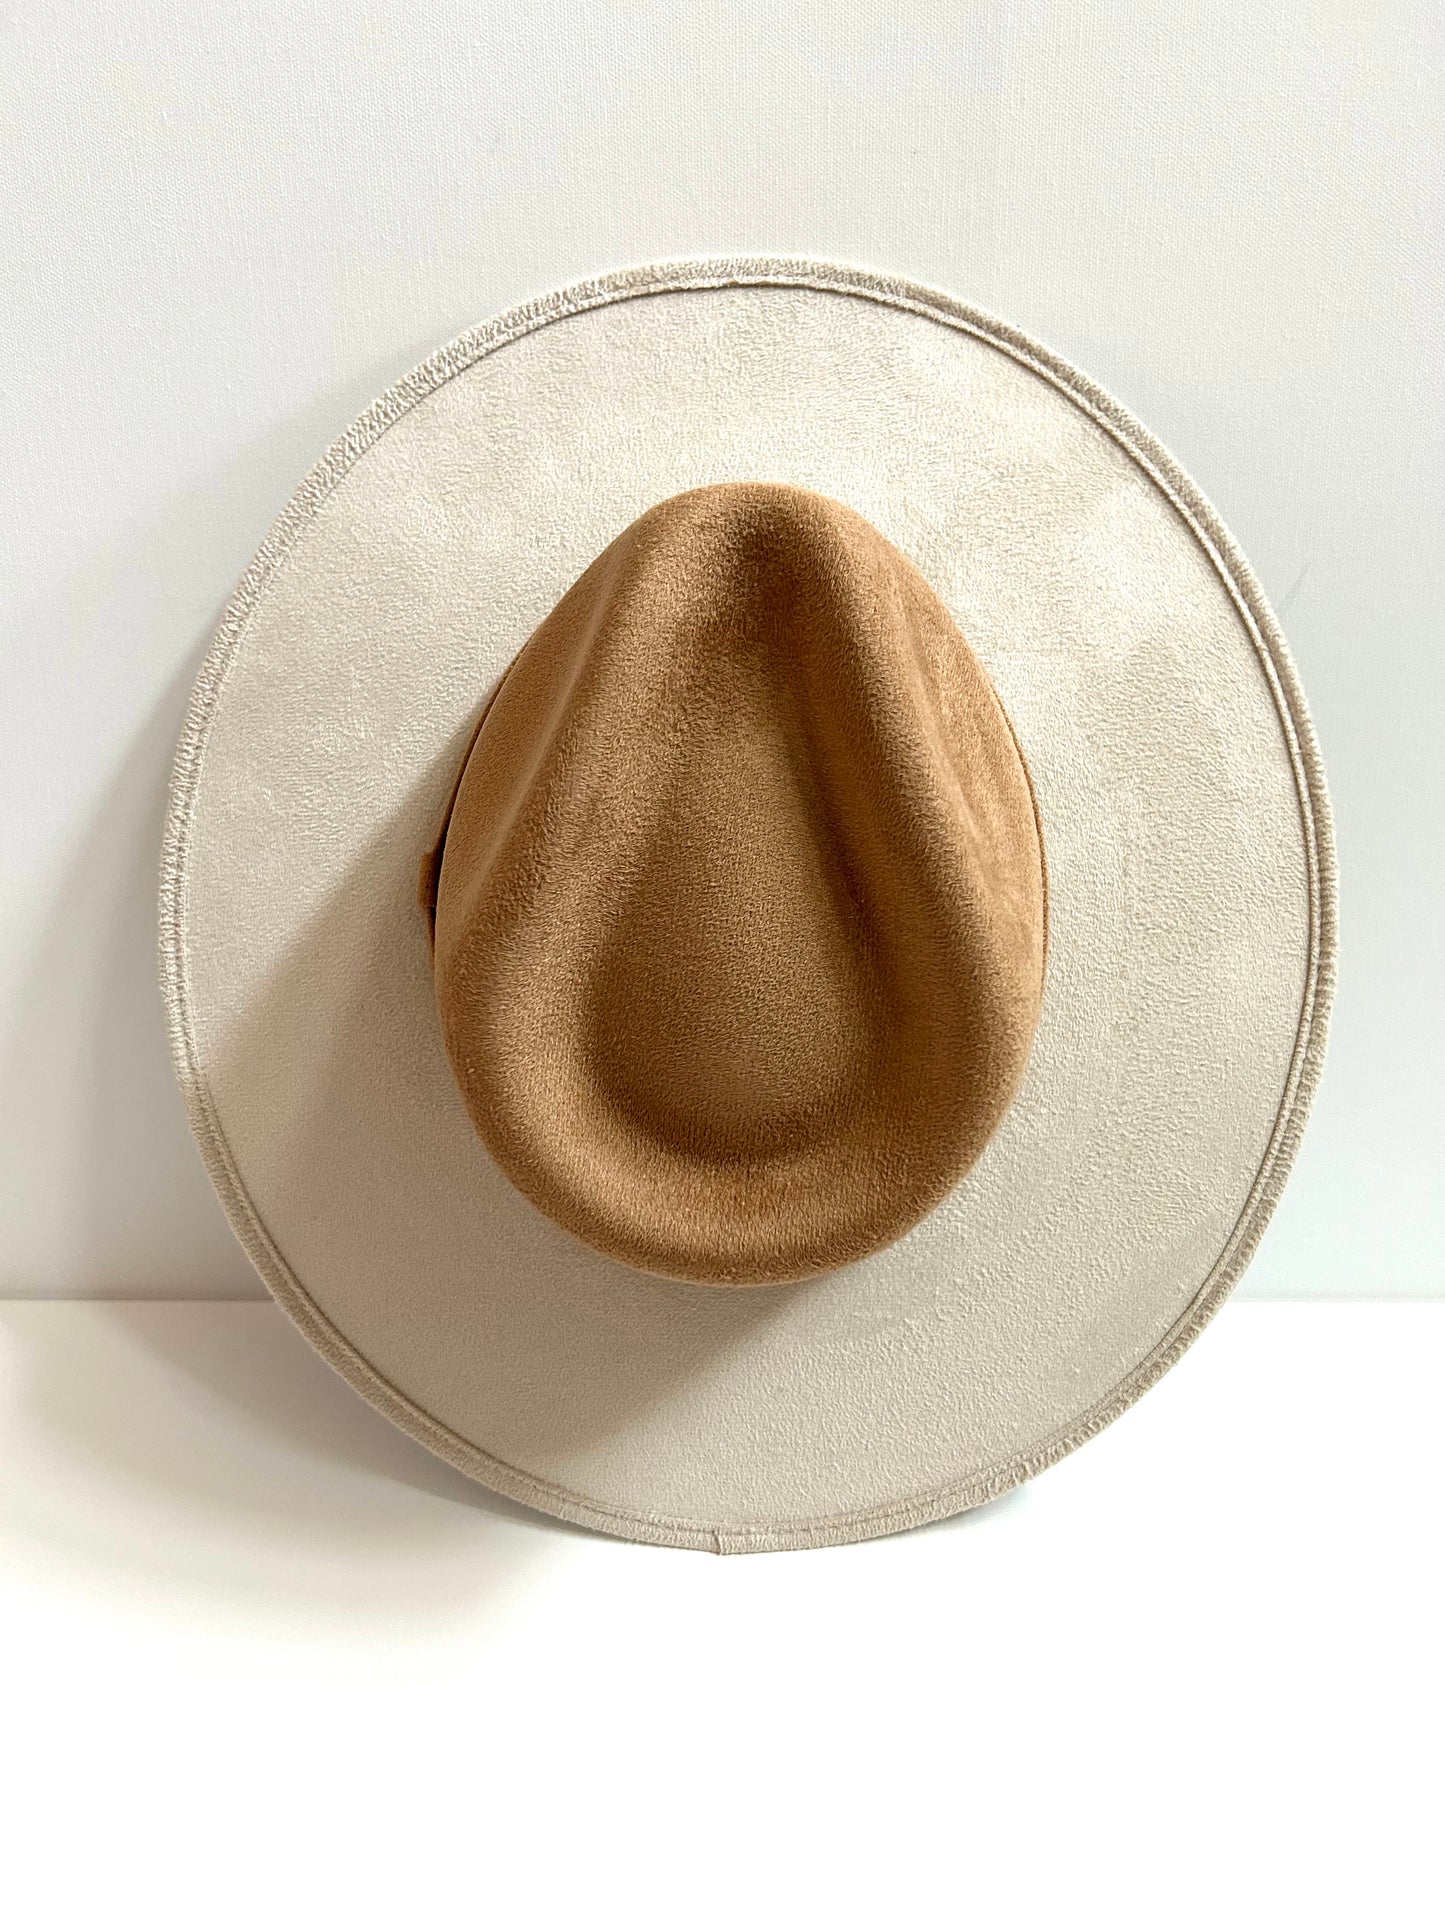 Vegan Suede Rancher Hat - Two Tone - Ivory + Cappuccino